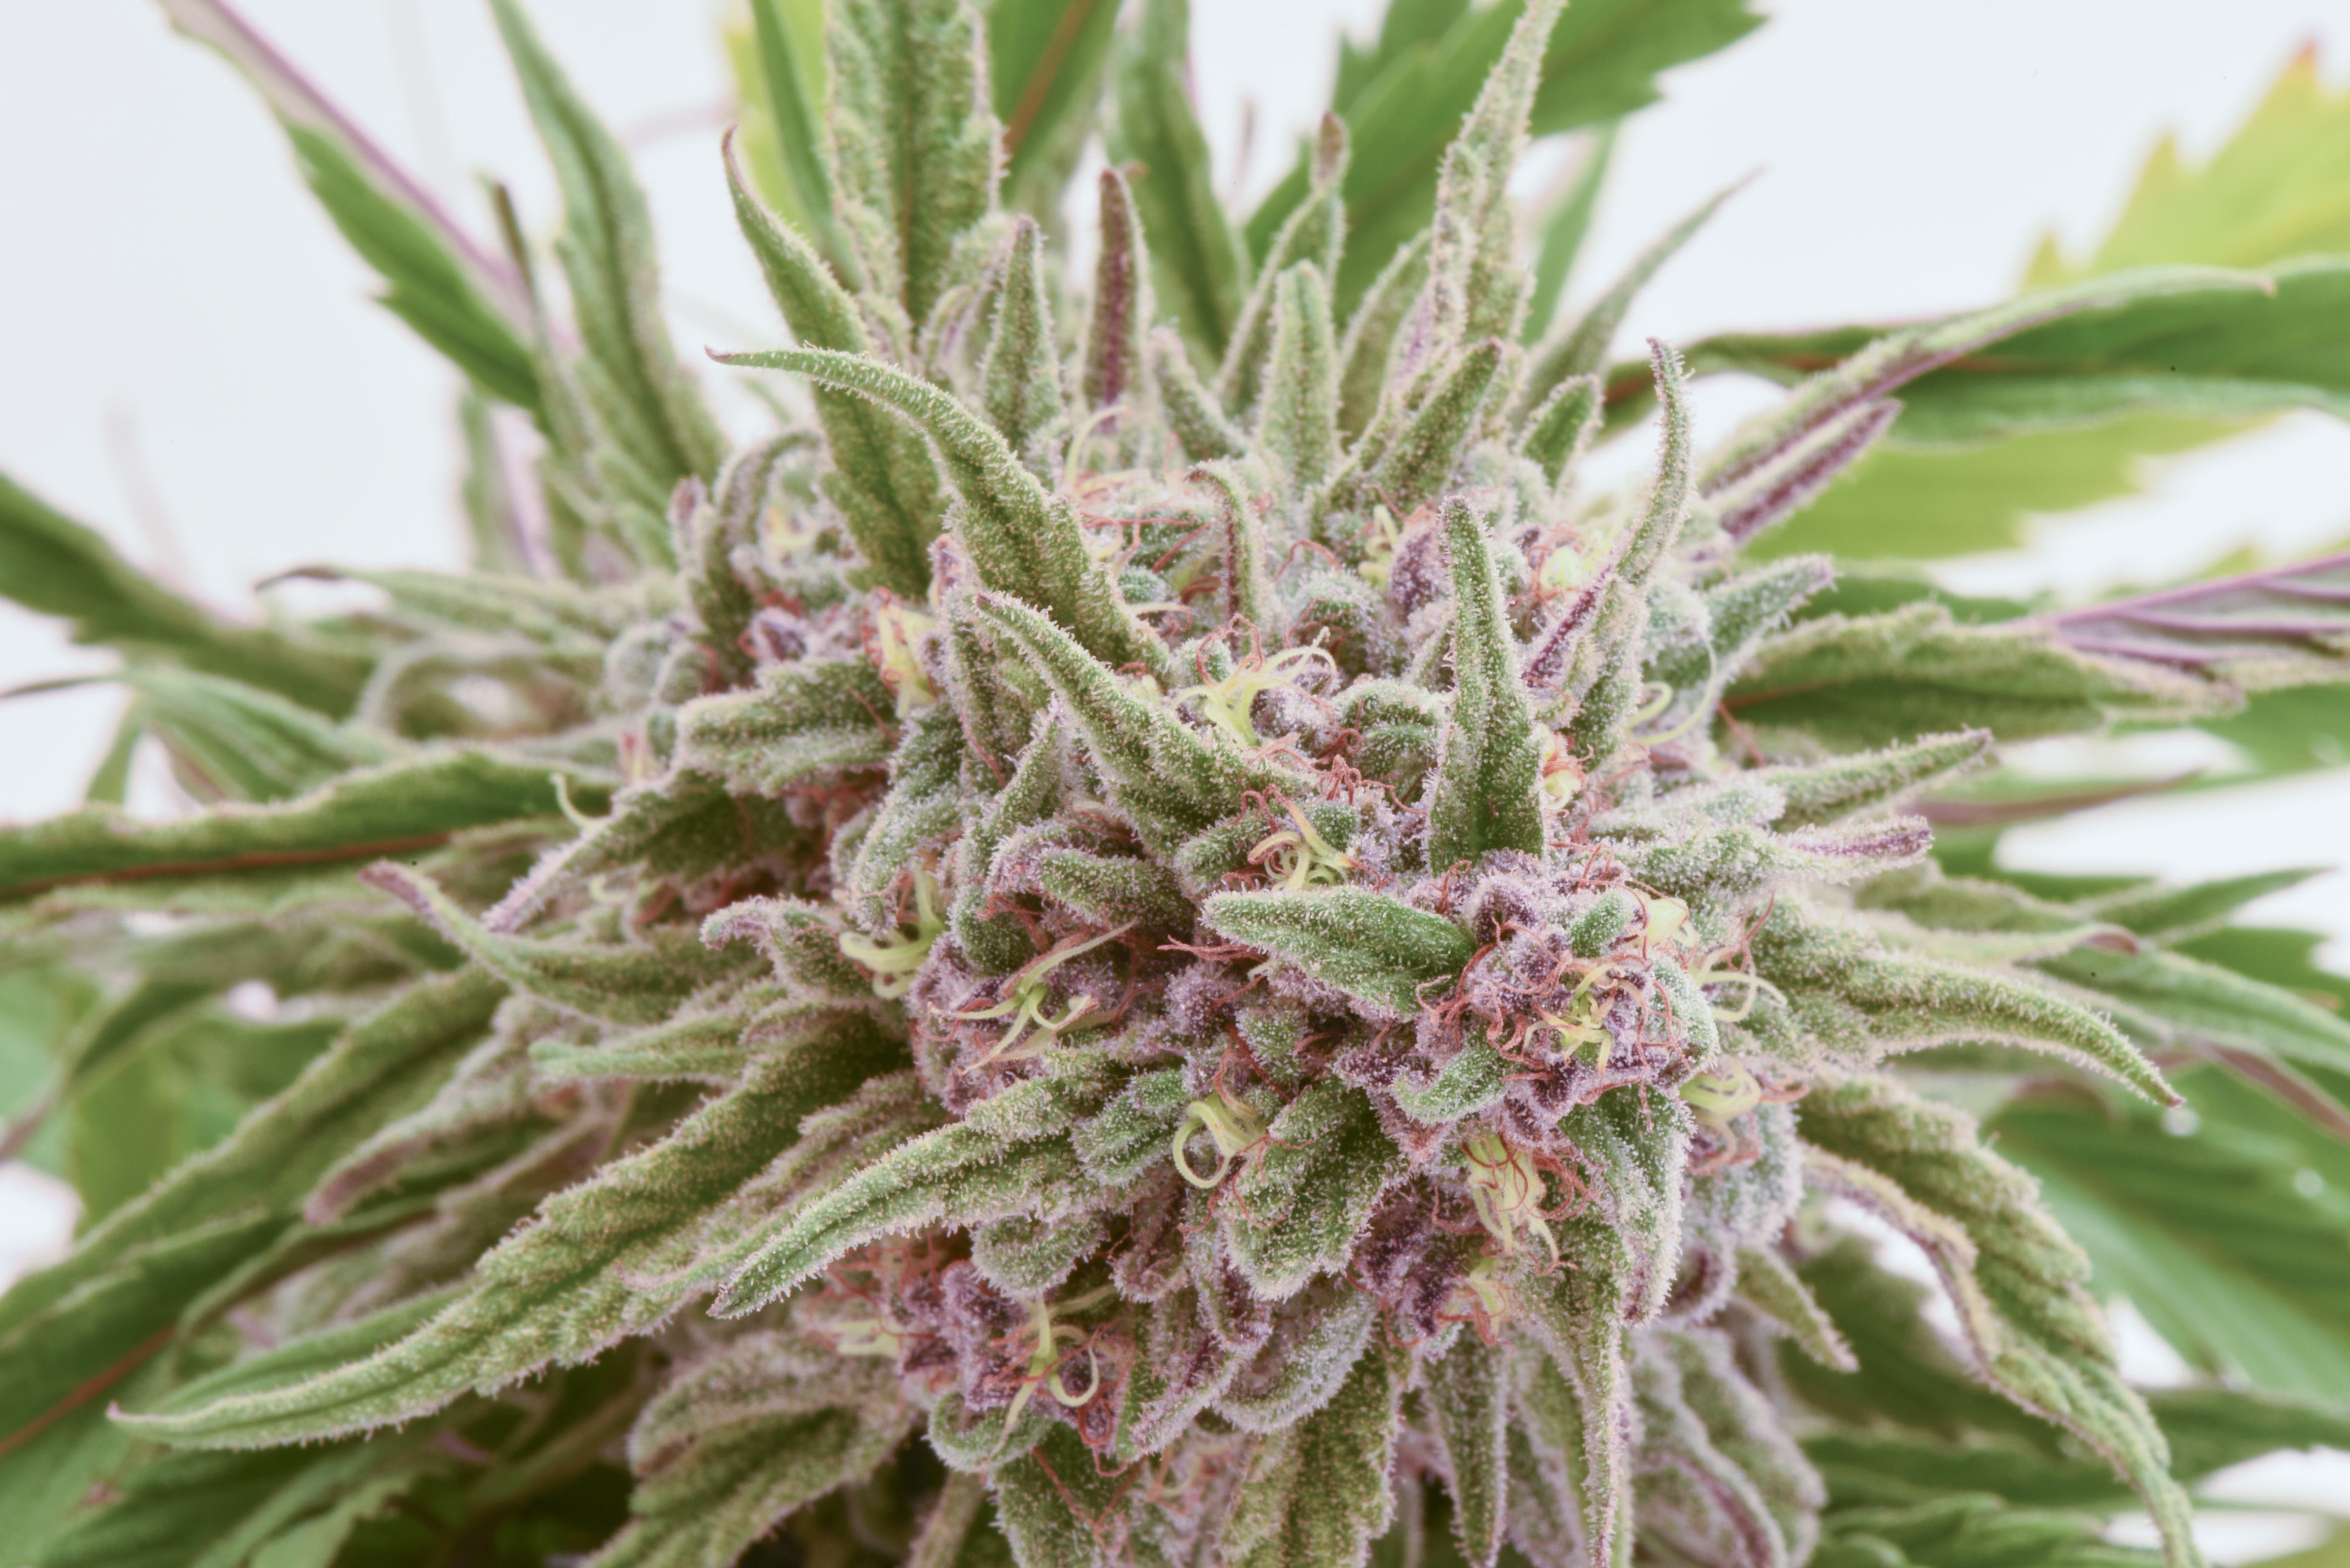 Close up of cannabis cola, or bud of the plant.